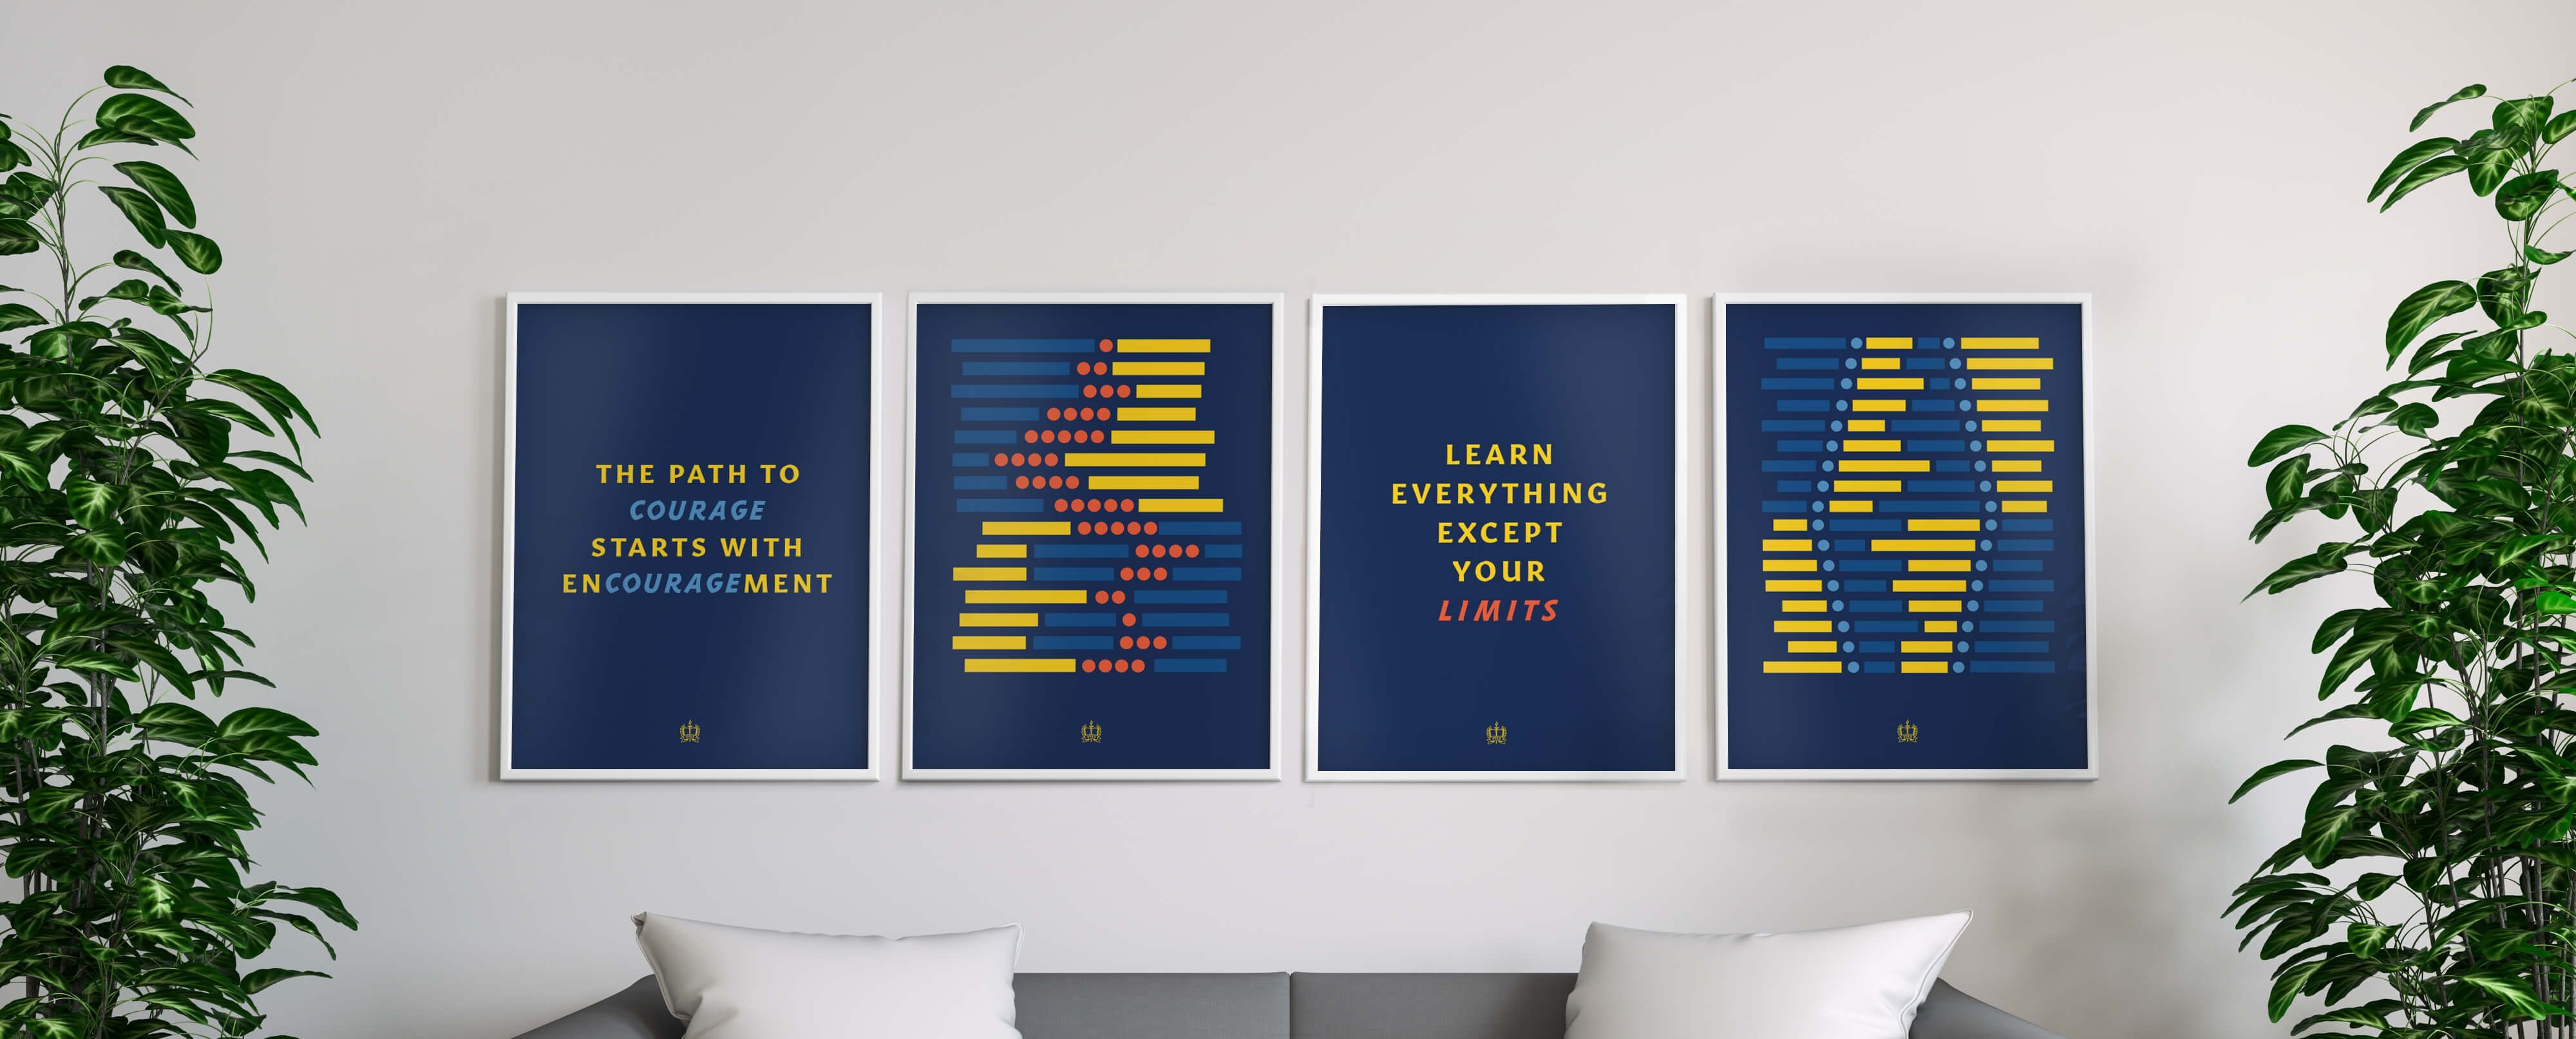 Four inspirational poster designs on a wall.